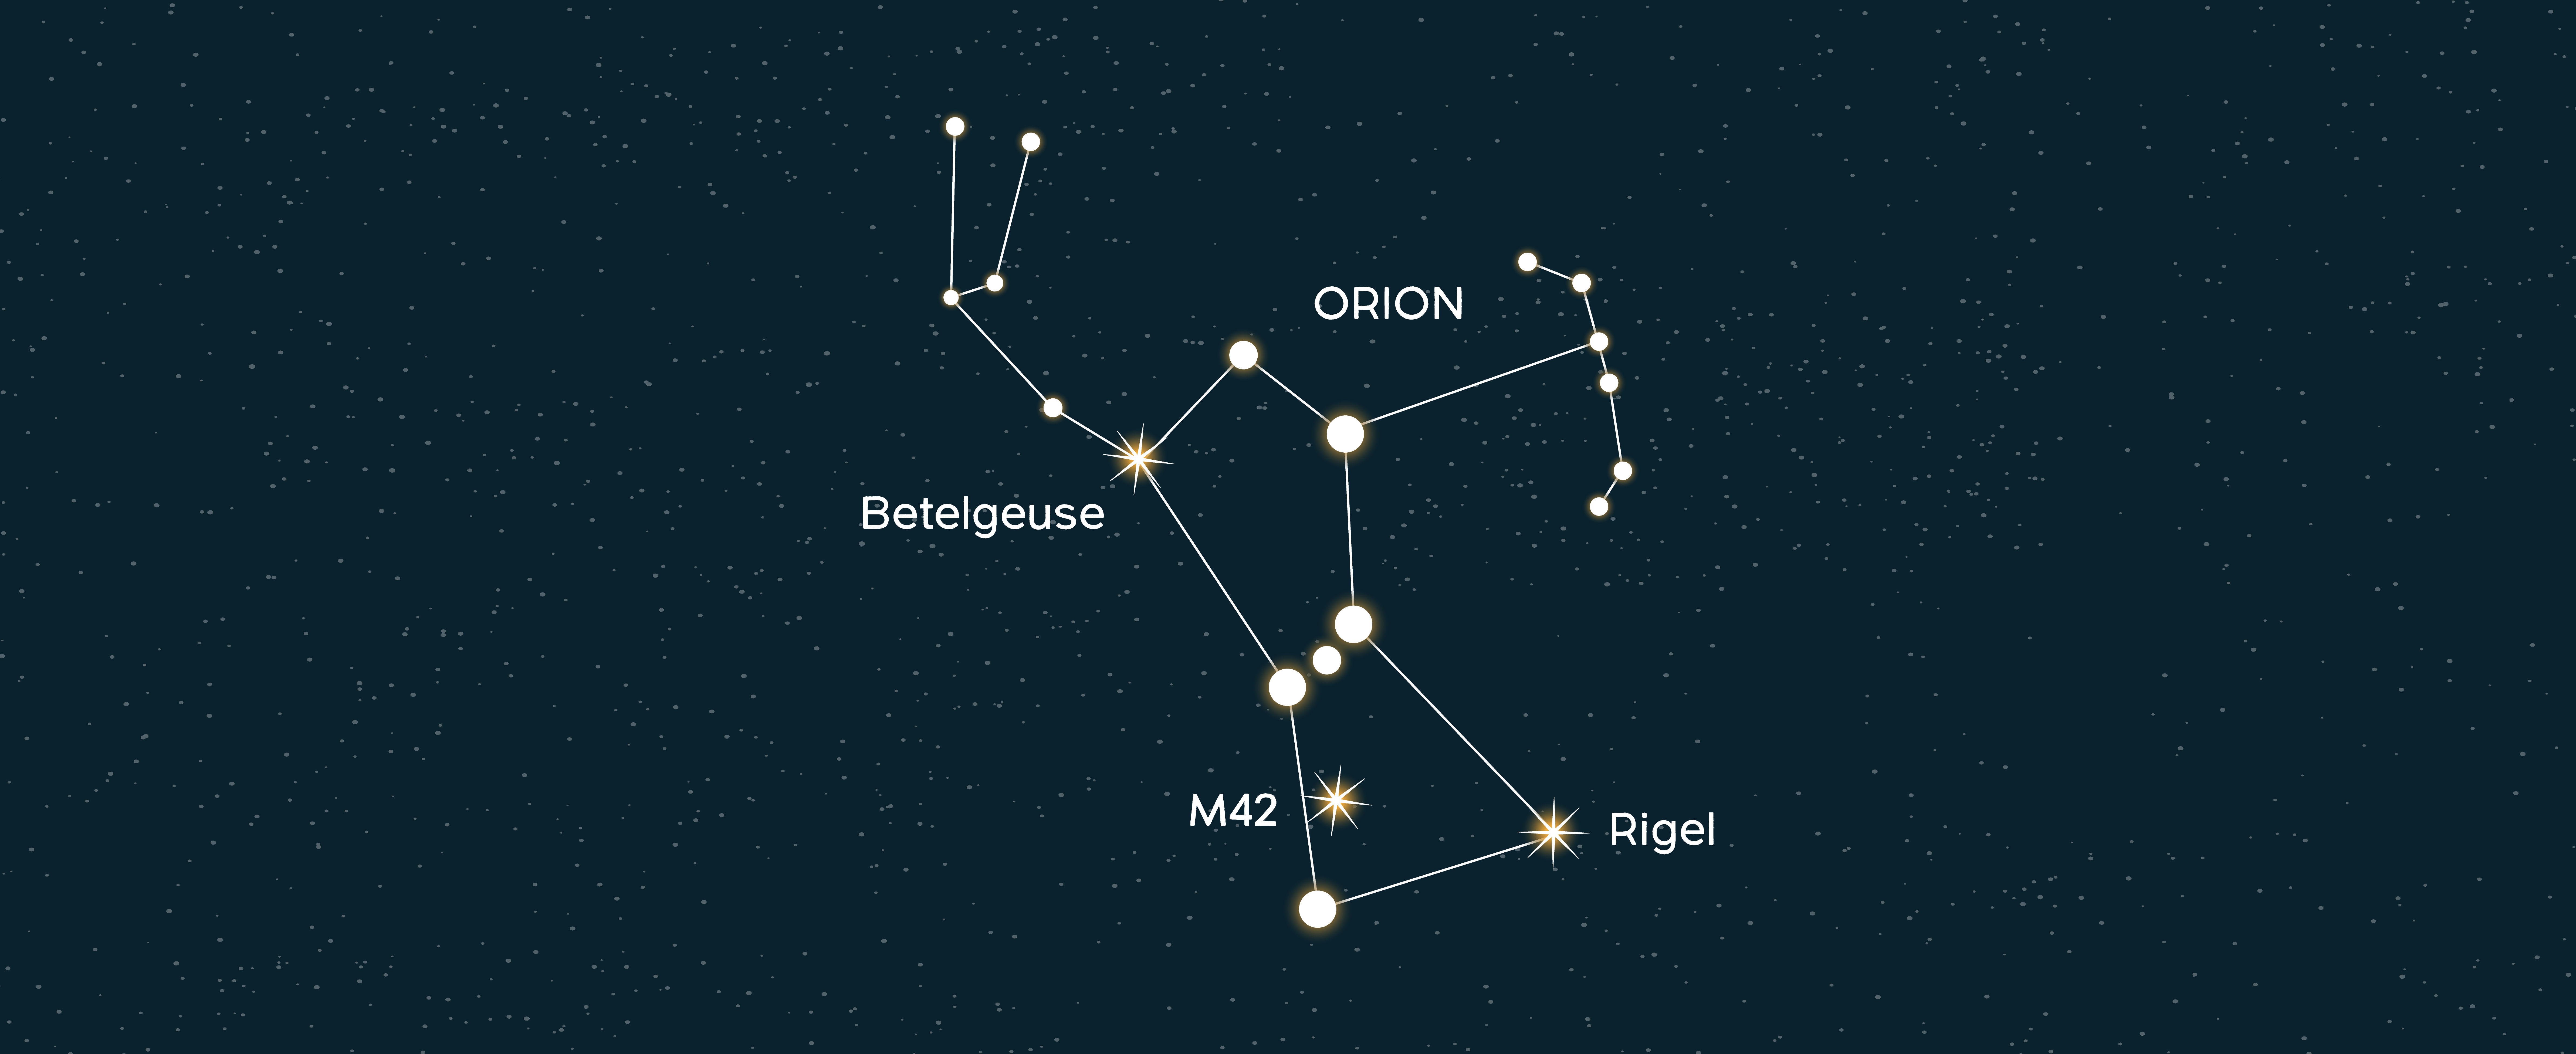 Looking at Orion